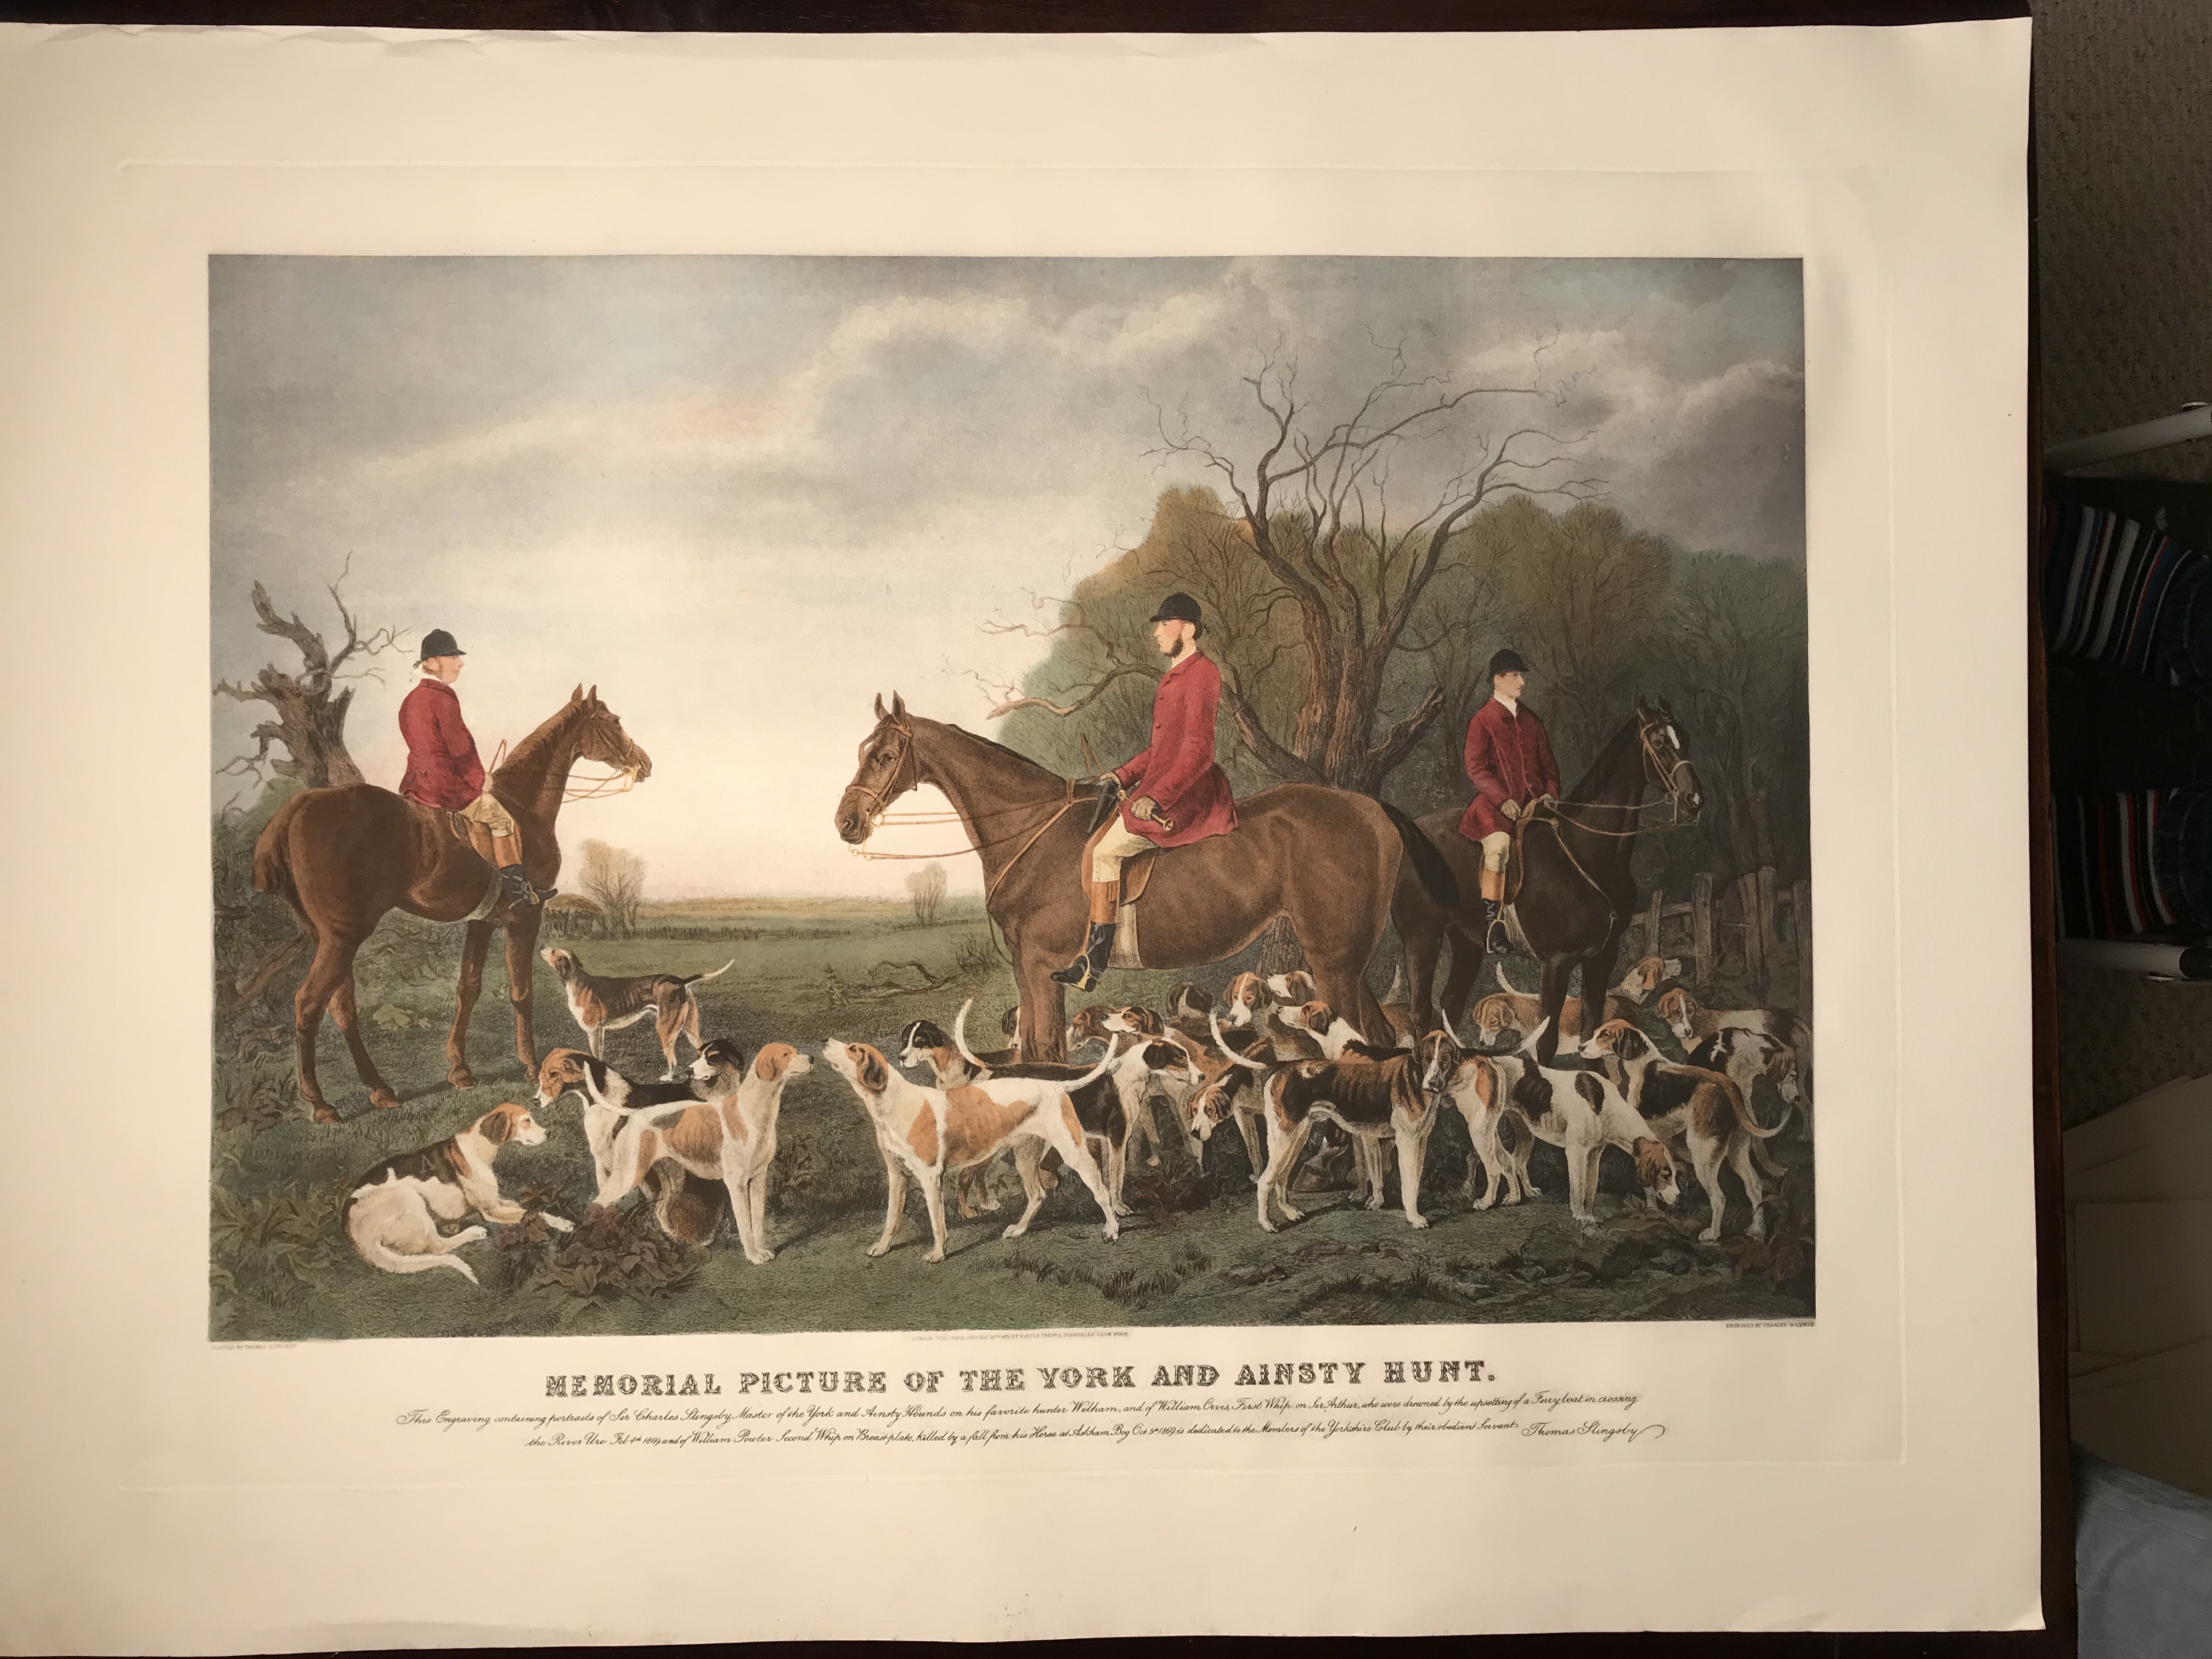 Memorial Picture of the York and Ainsty Hunt